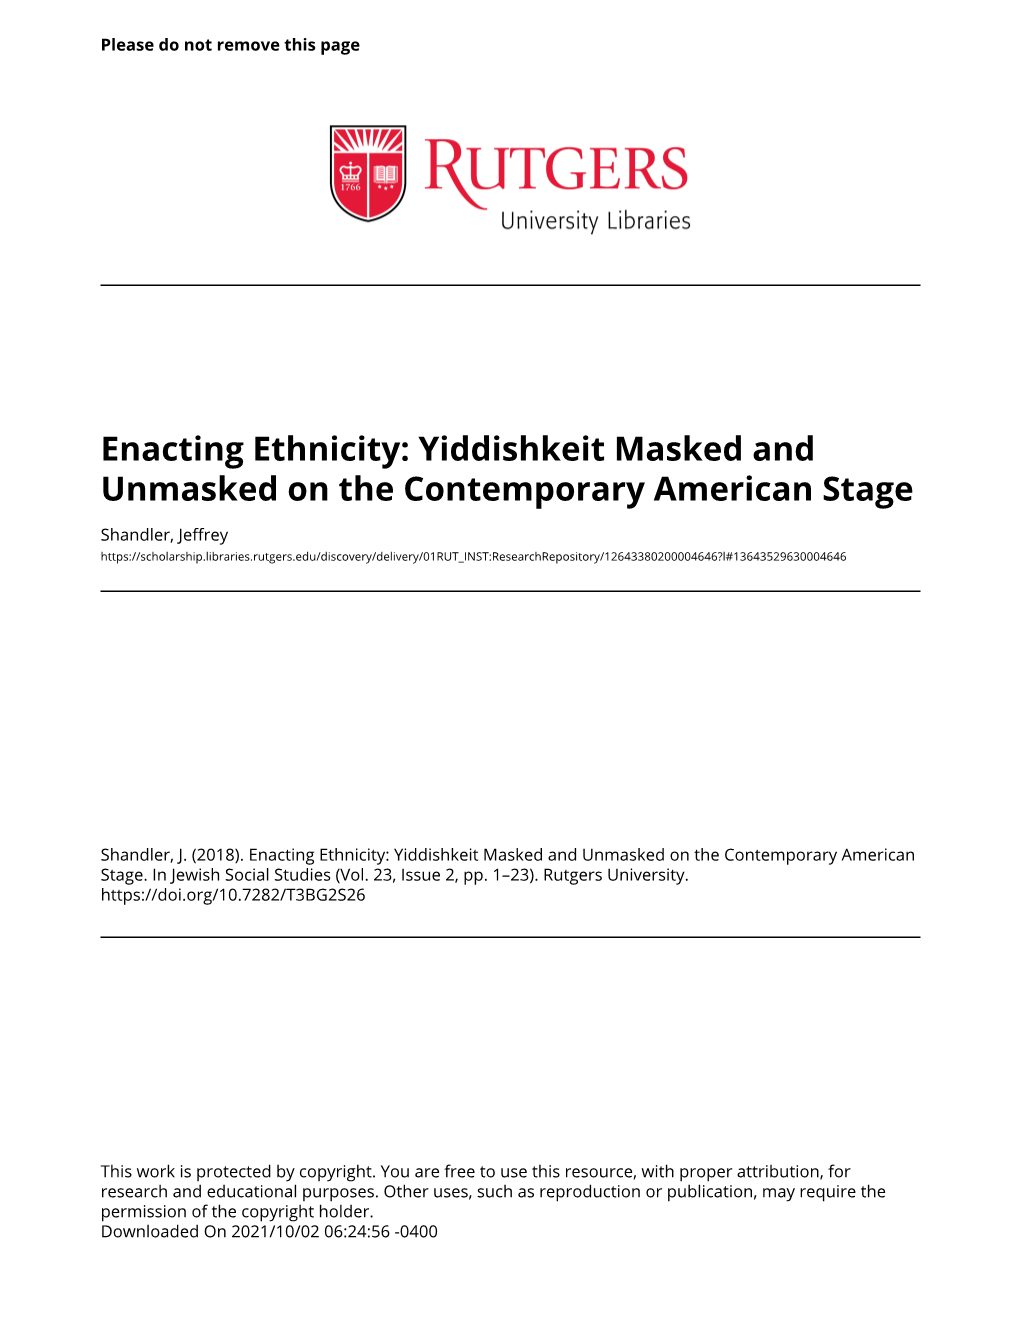 Enacting Ethnicity: Yiddishkeit Masked and Unmasked on the Contemporary American Stage